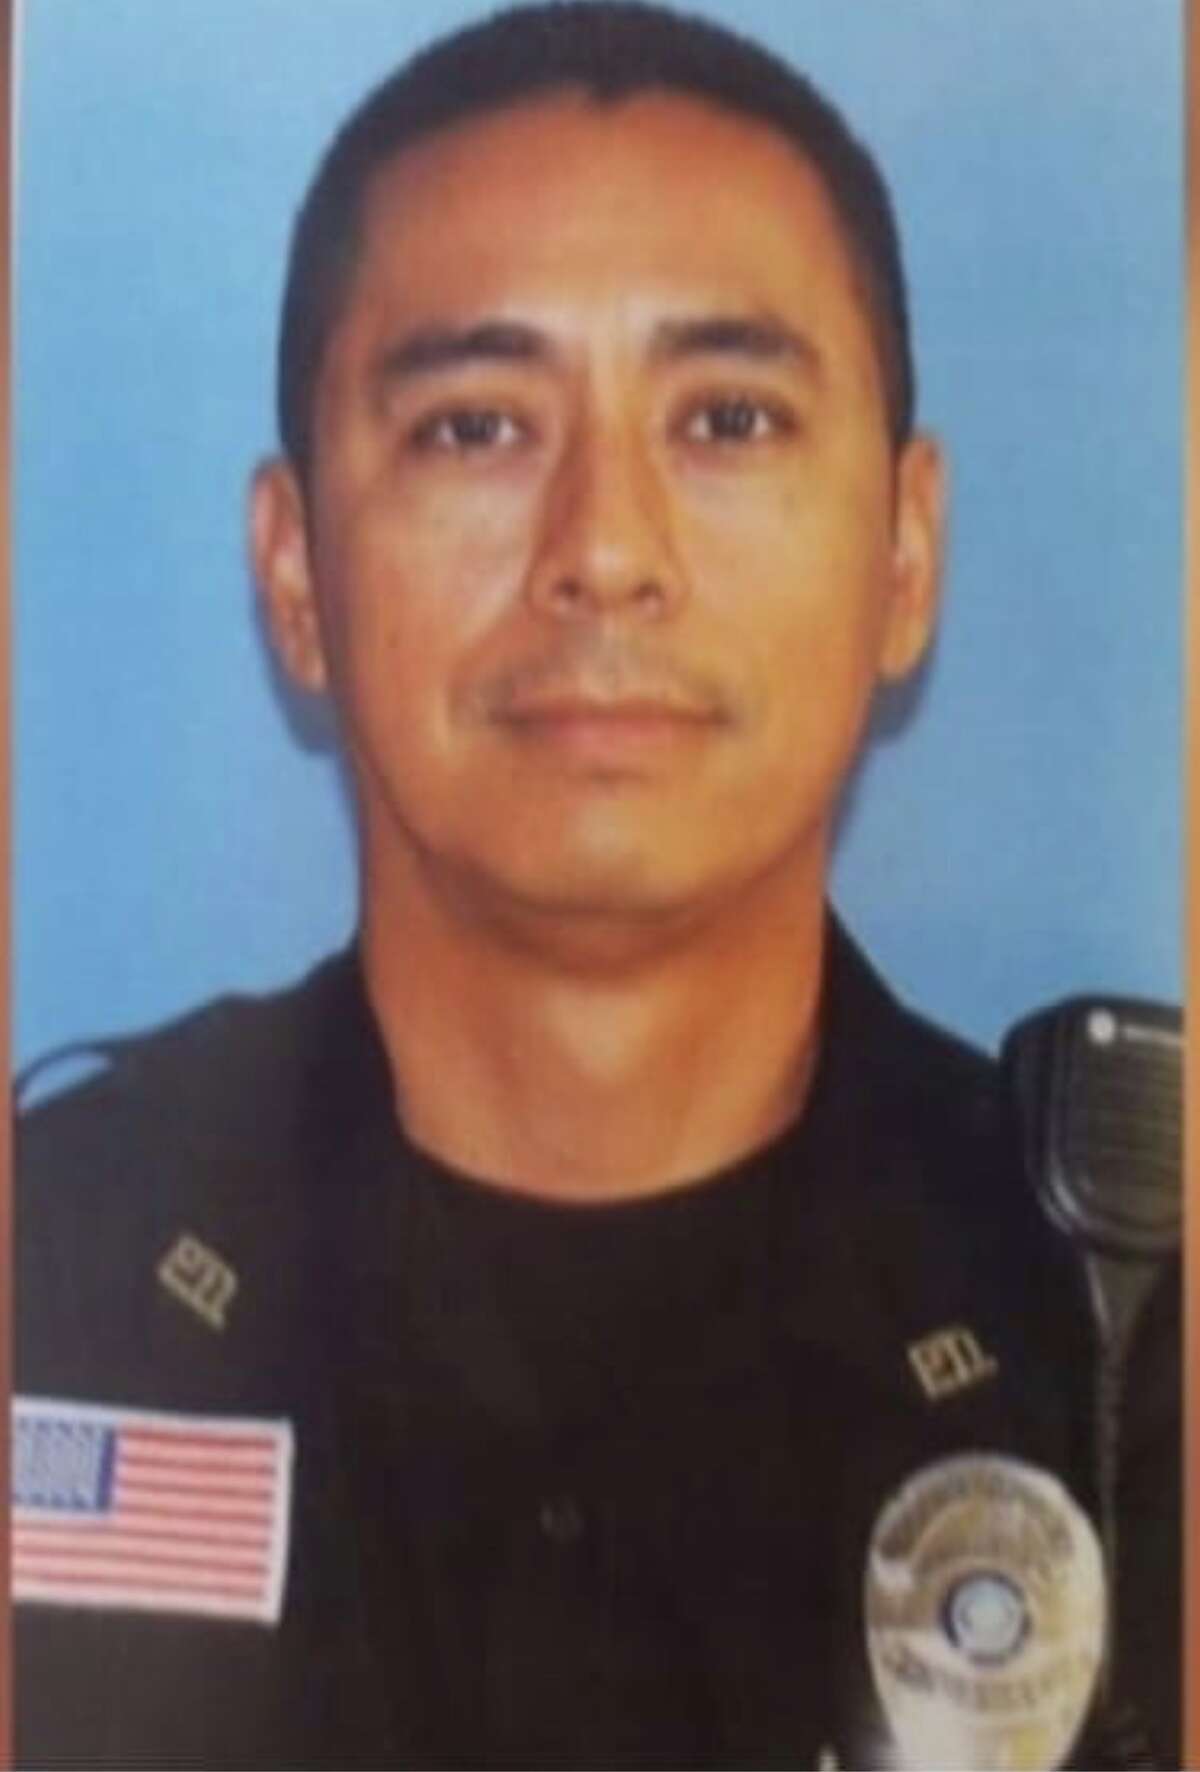 UISD police officer Jose Izaguirre was off duty at the time of the crash.